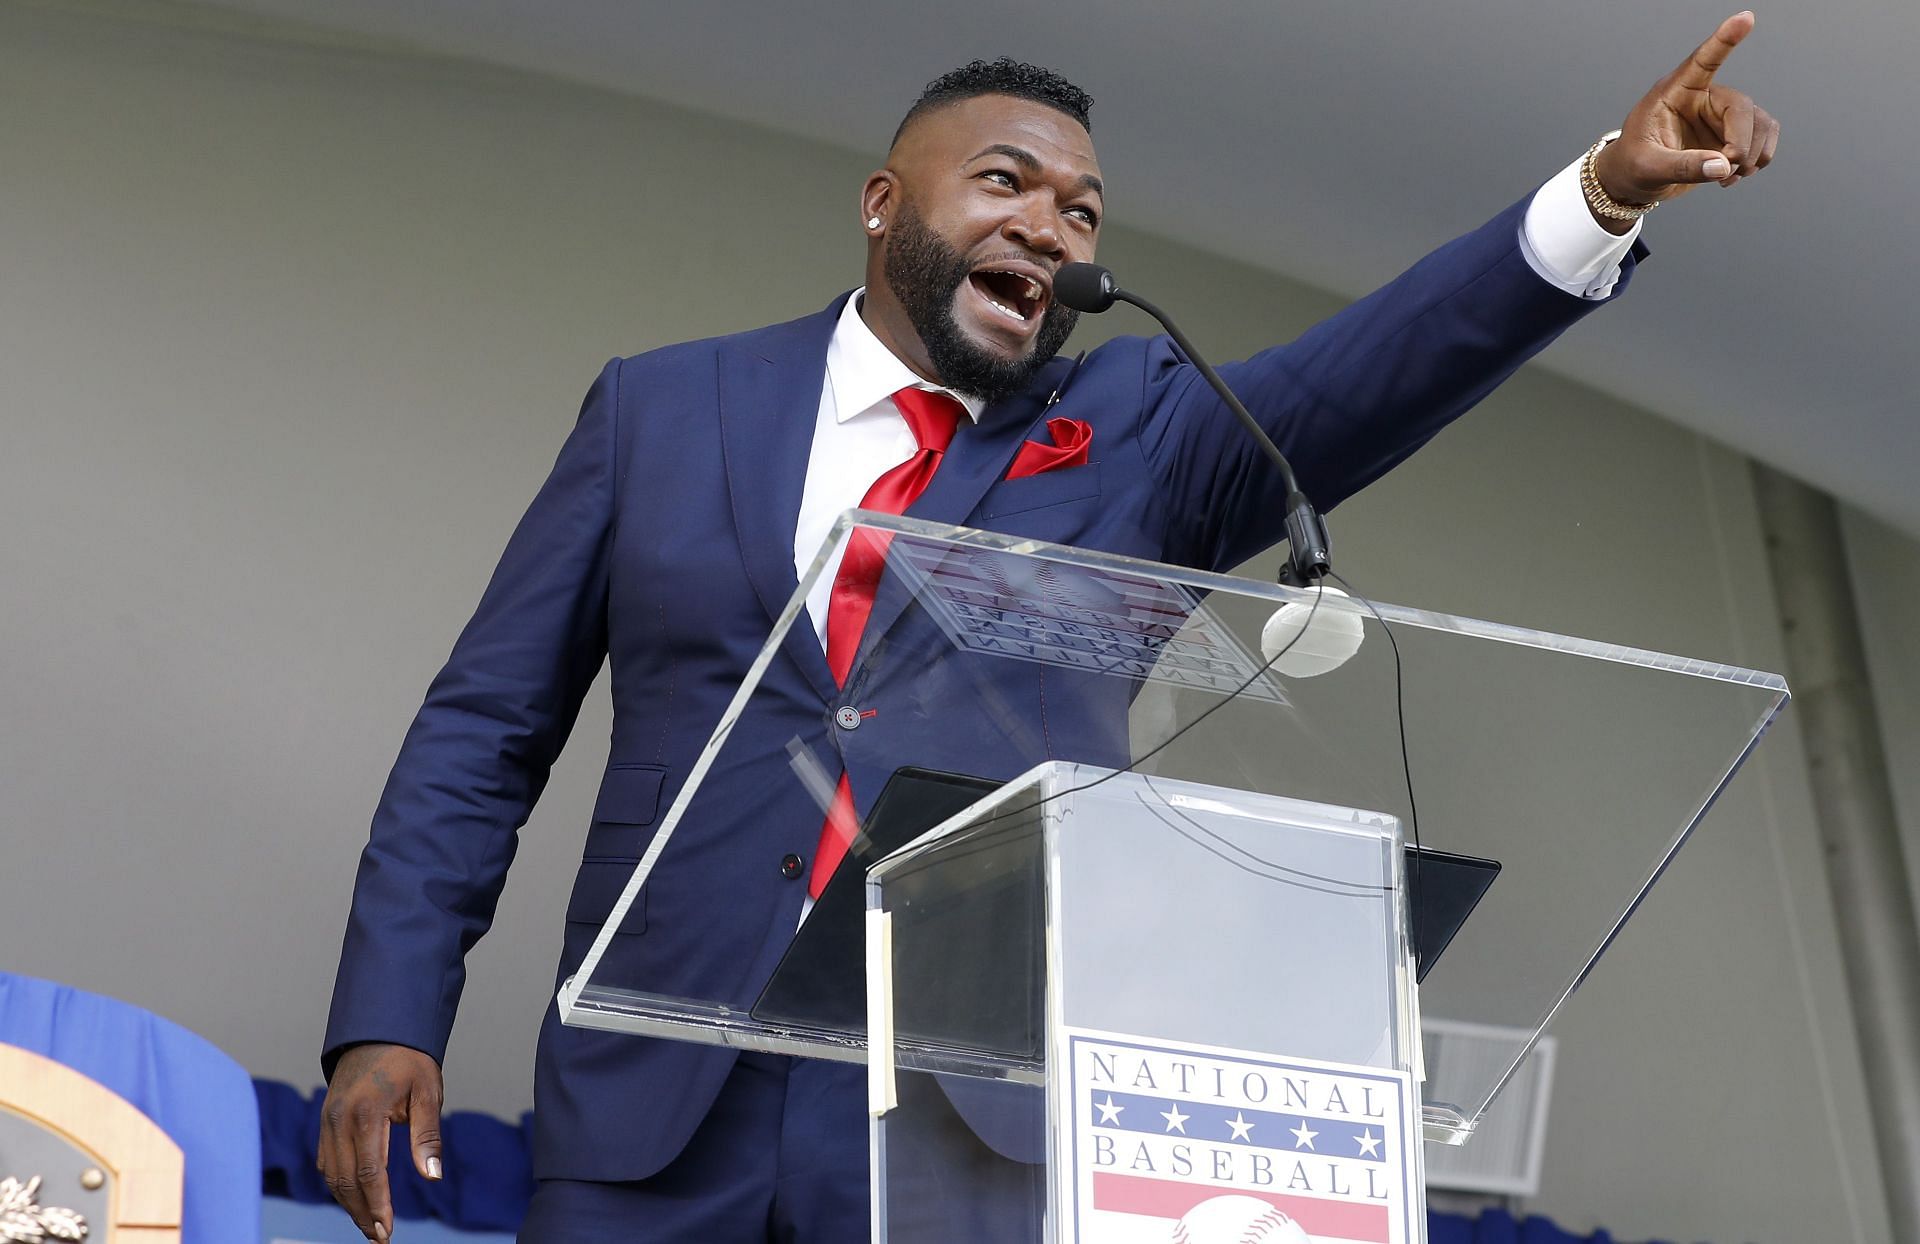 David Ortiz was inducted into the Hall of Fame in January 2022